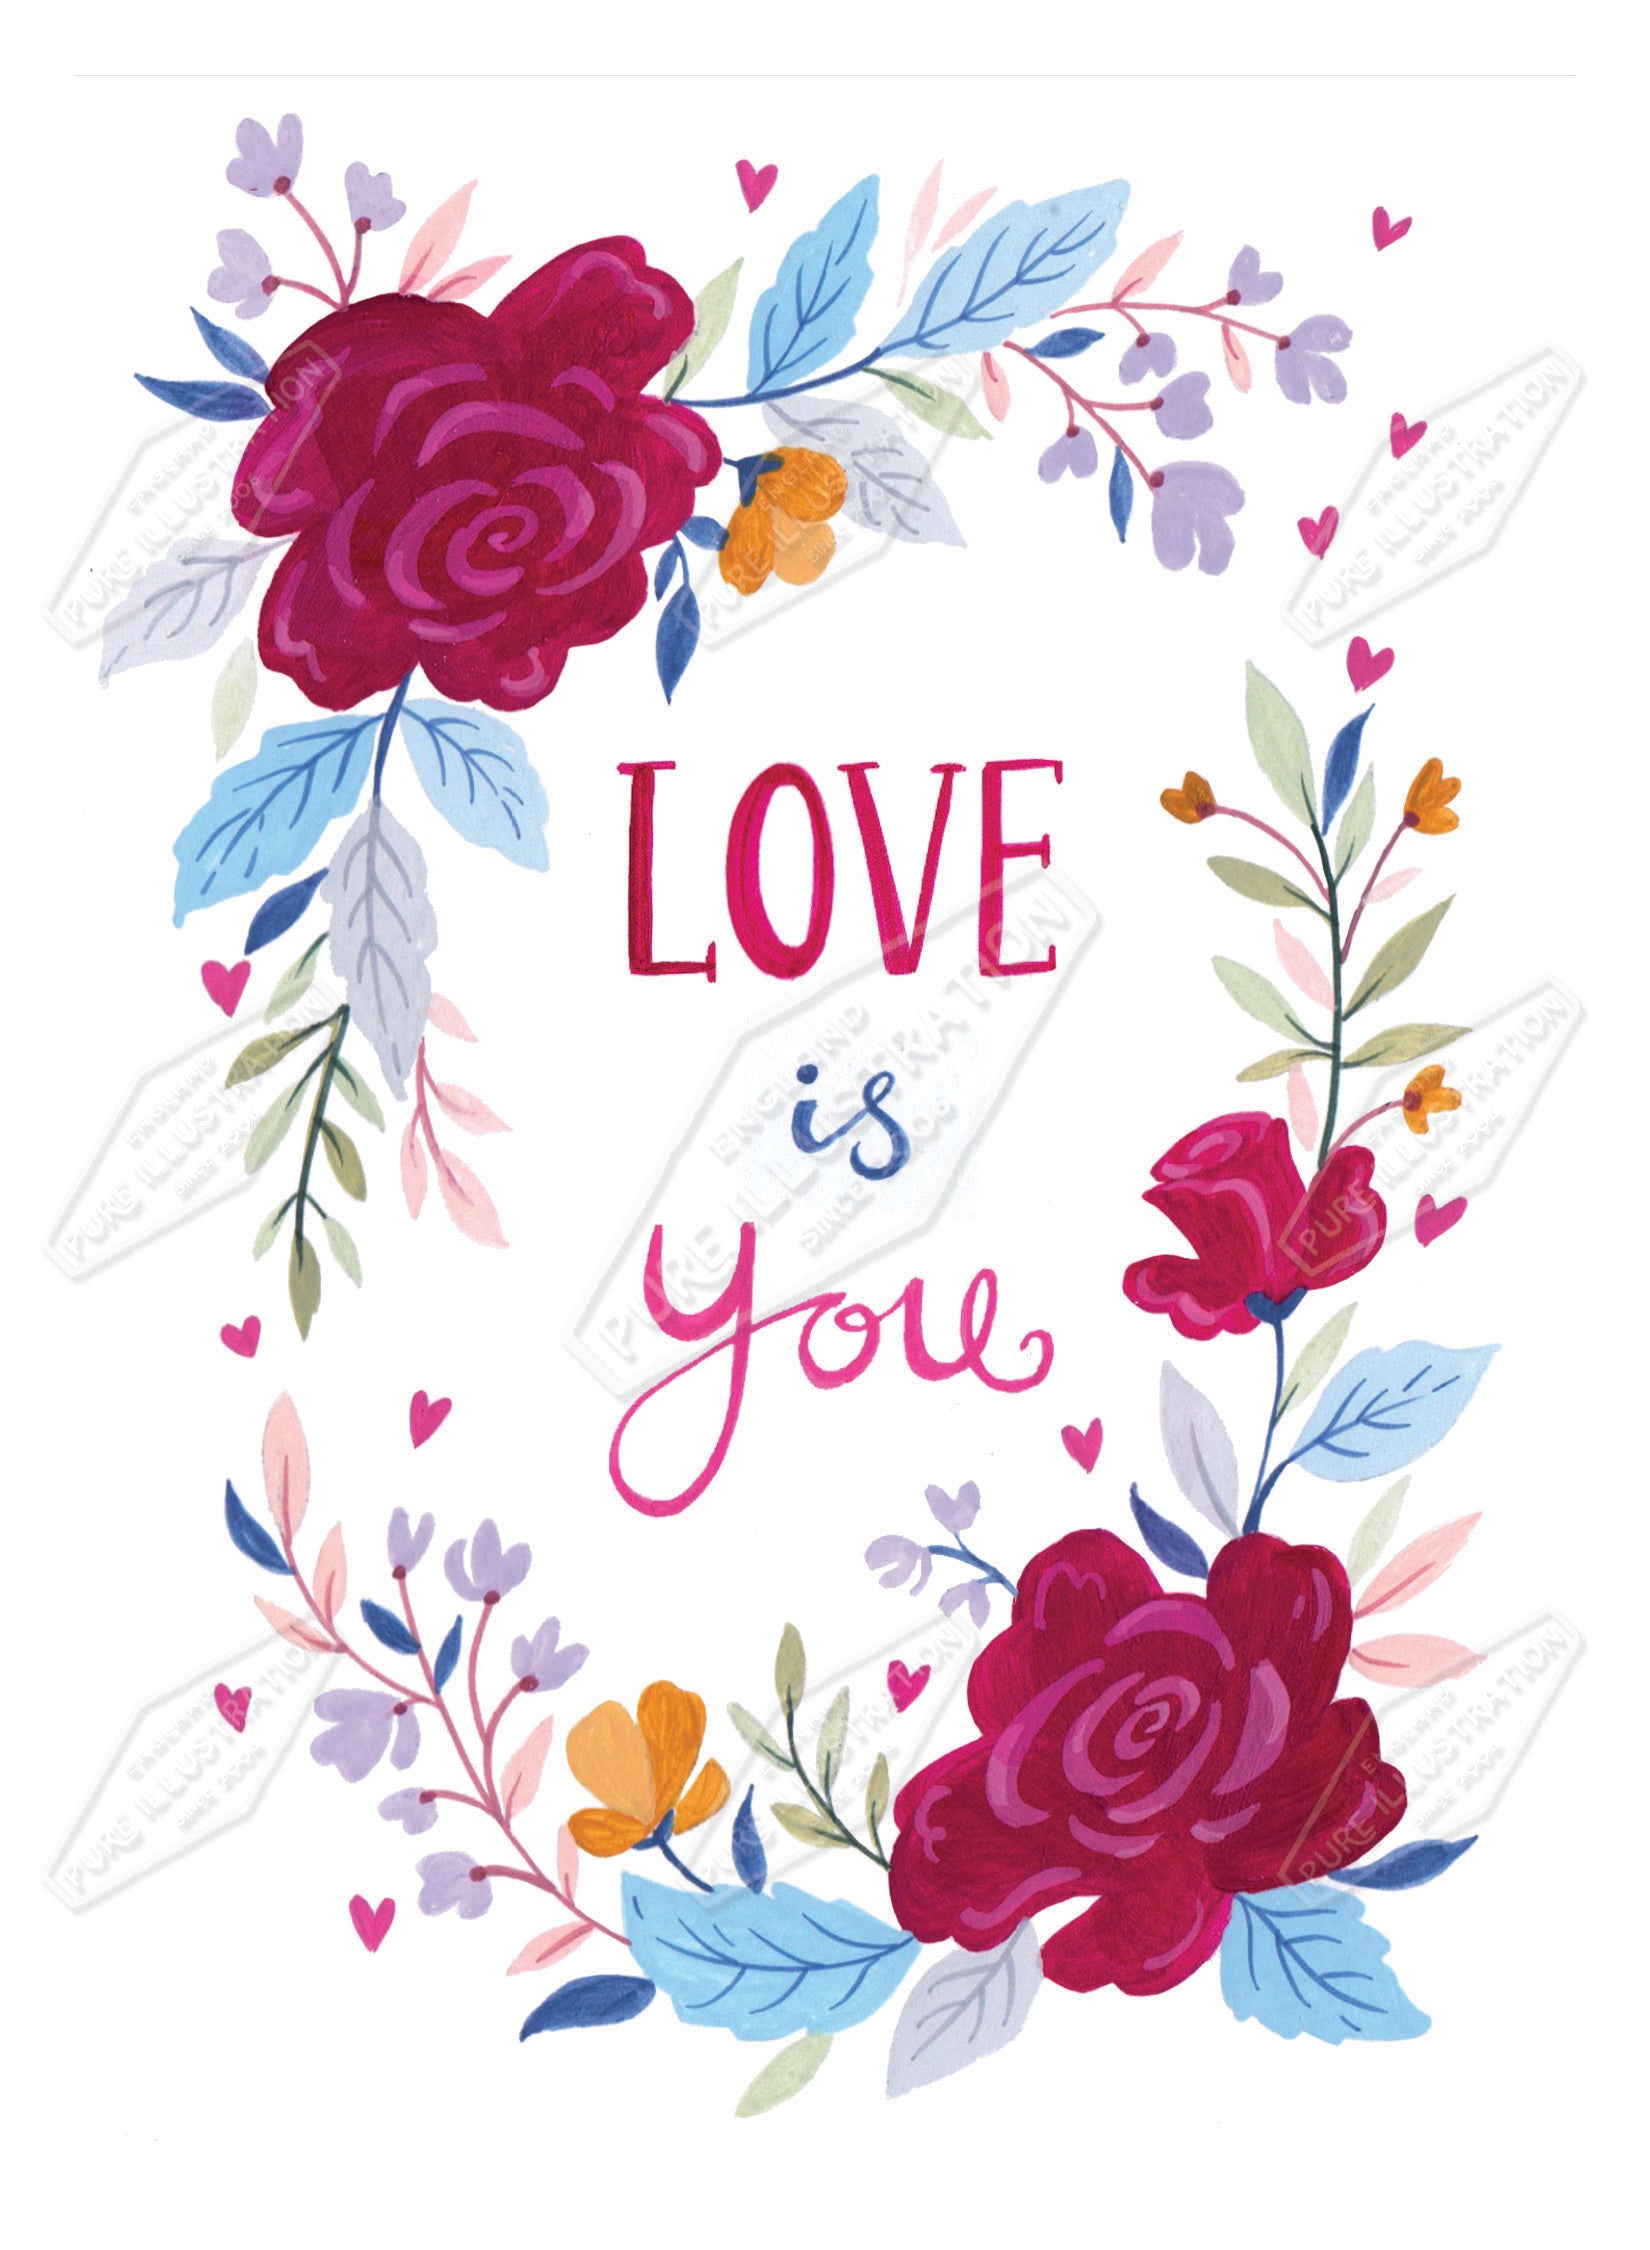 00035779AMA - Ally Marie is represented by Pure Art Licensing Agency - Valentine's Day Greeting Card Design